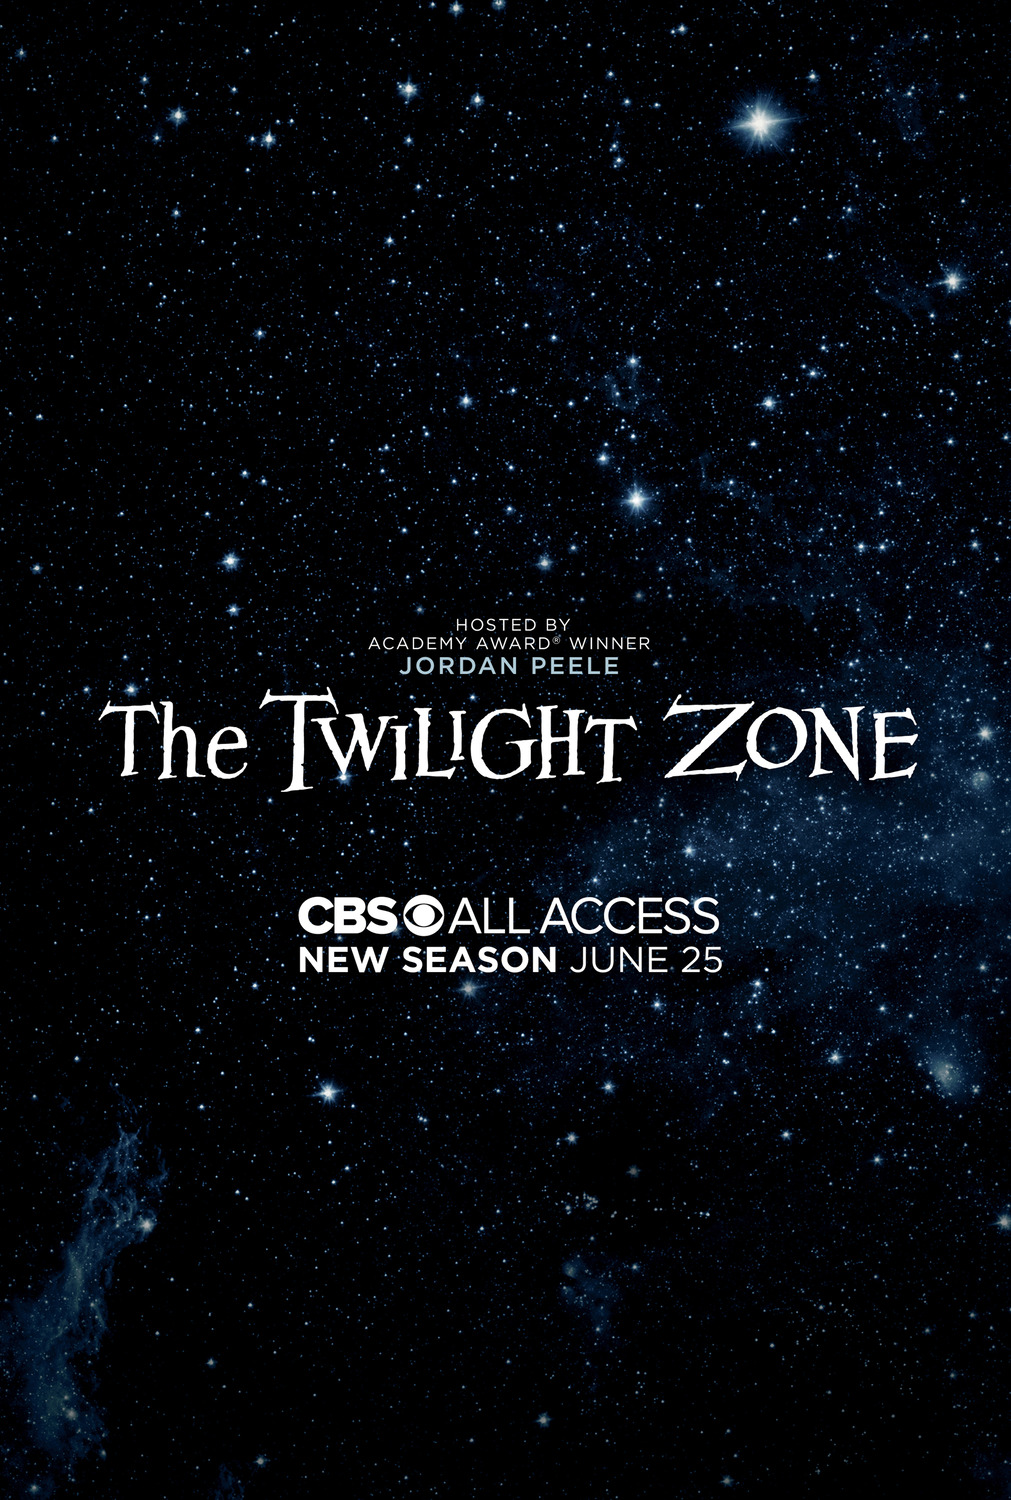 Extra Large TV Poster Image for The Twilight Zone (#15 of 15)